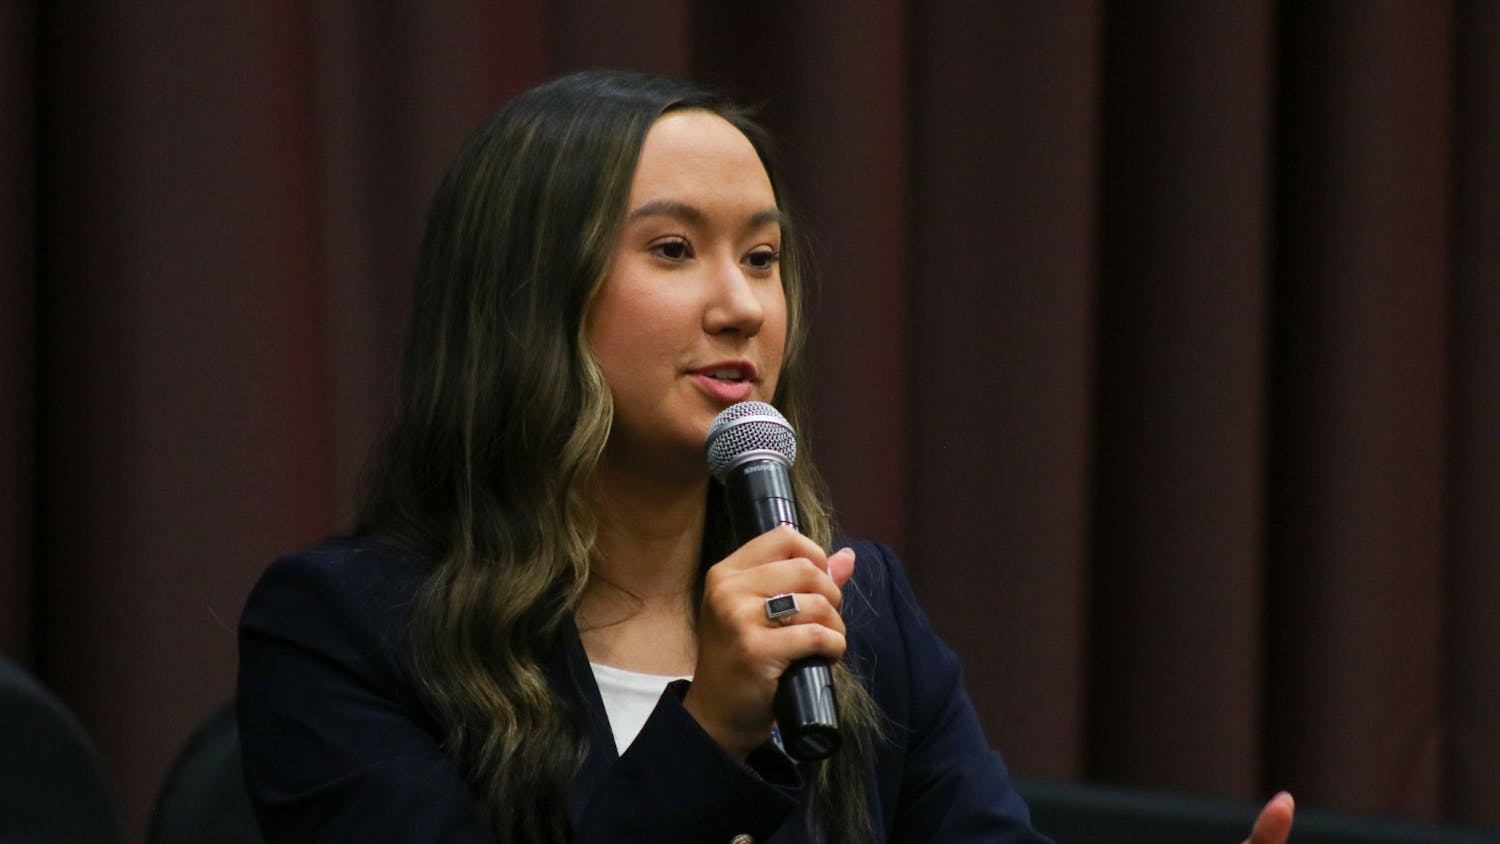 Presidential candidate and third-year political science student Emily “Emmie” Thompson answers a question at the Student Government debate on Feb. 15, 2023. She promotes her campaign by advertising “tangible” goals and promises.